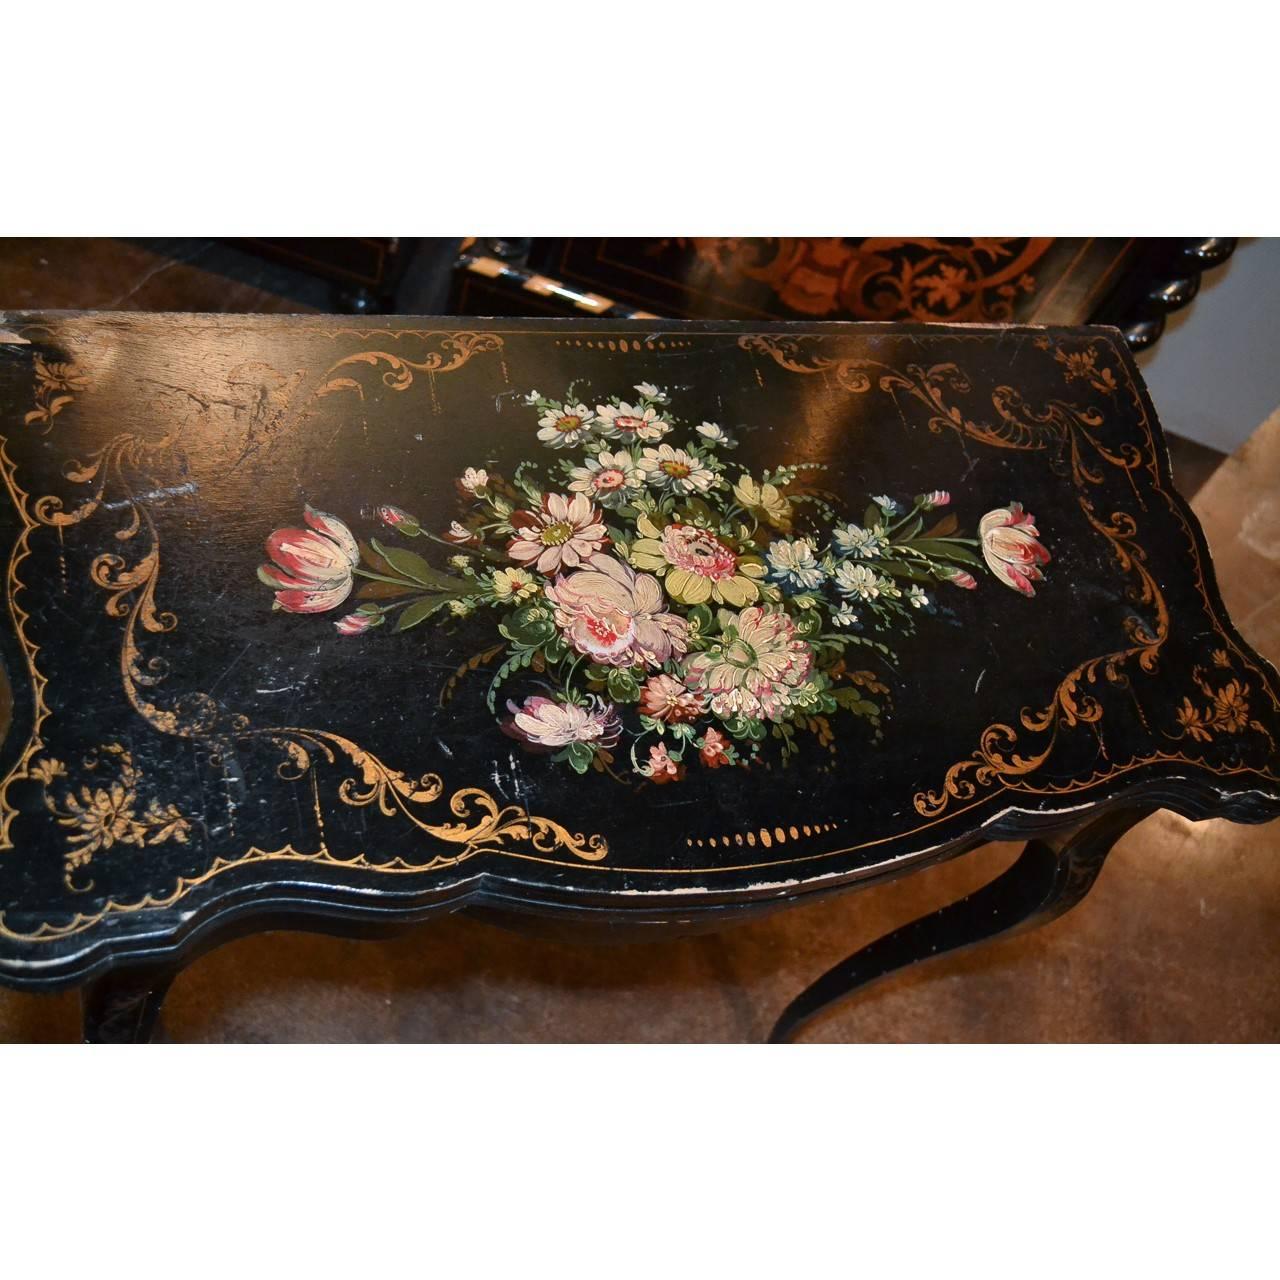 19th century French black lacquered gaming or side table with swivel fold out top and contoured apron. Decorated overall with colorful hand-painted flower clusters and bouquets and accented with gold gilt stylized leaves. The entire on slender and